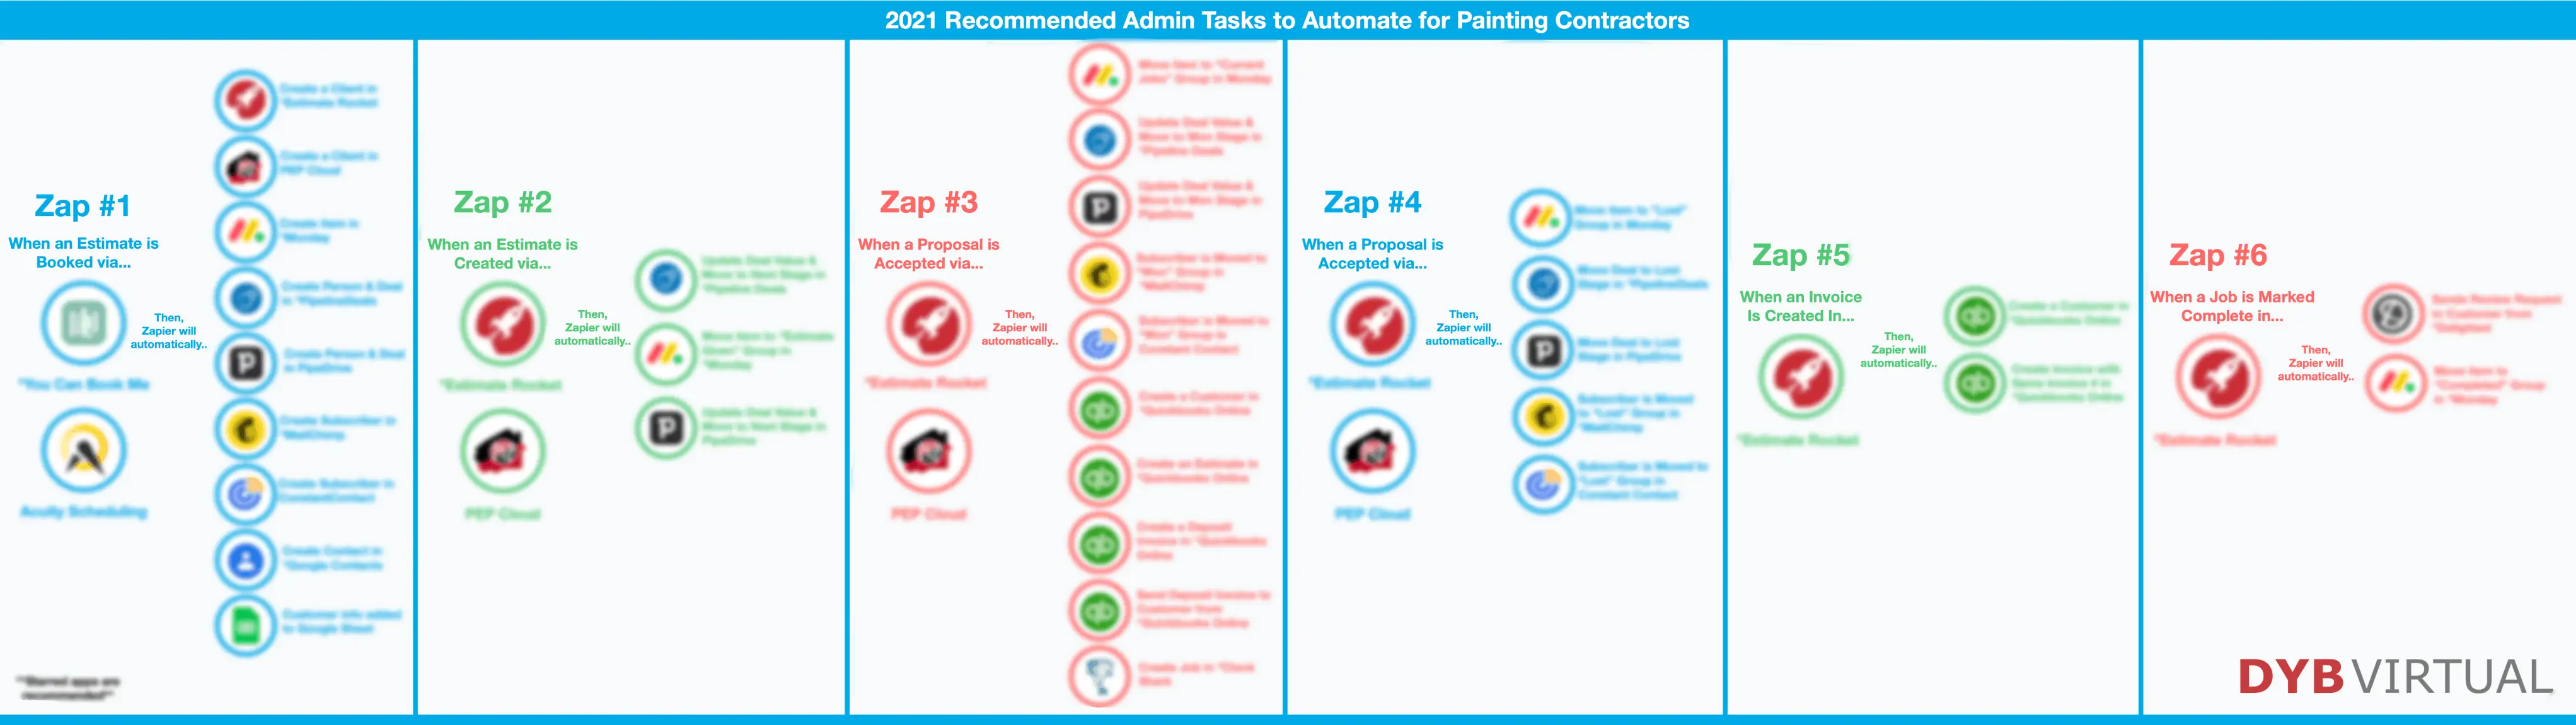 Blur 2021 Recommended Admin Tasks to Automate for Painting Contractors